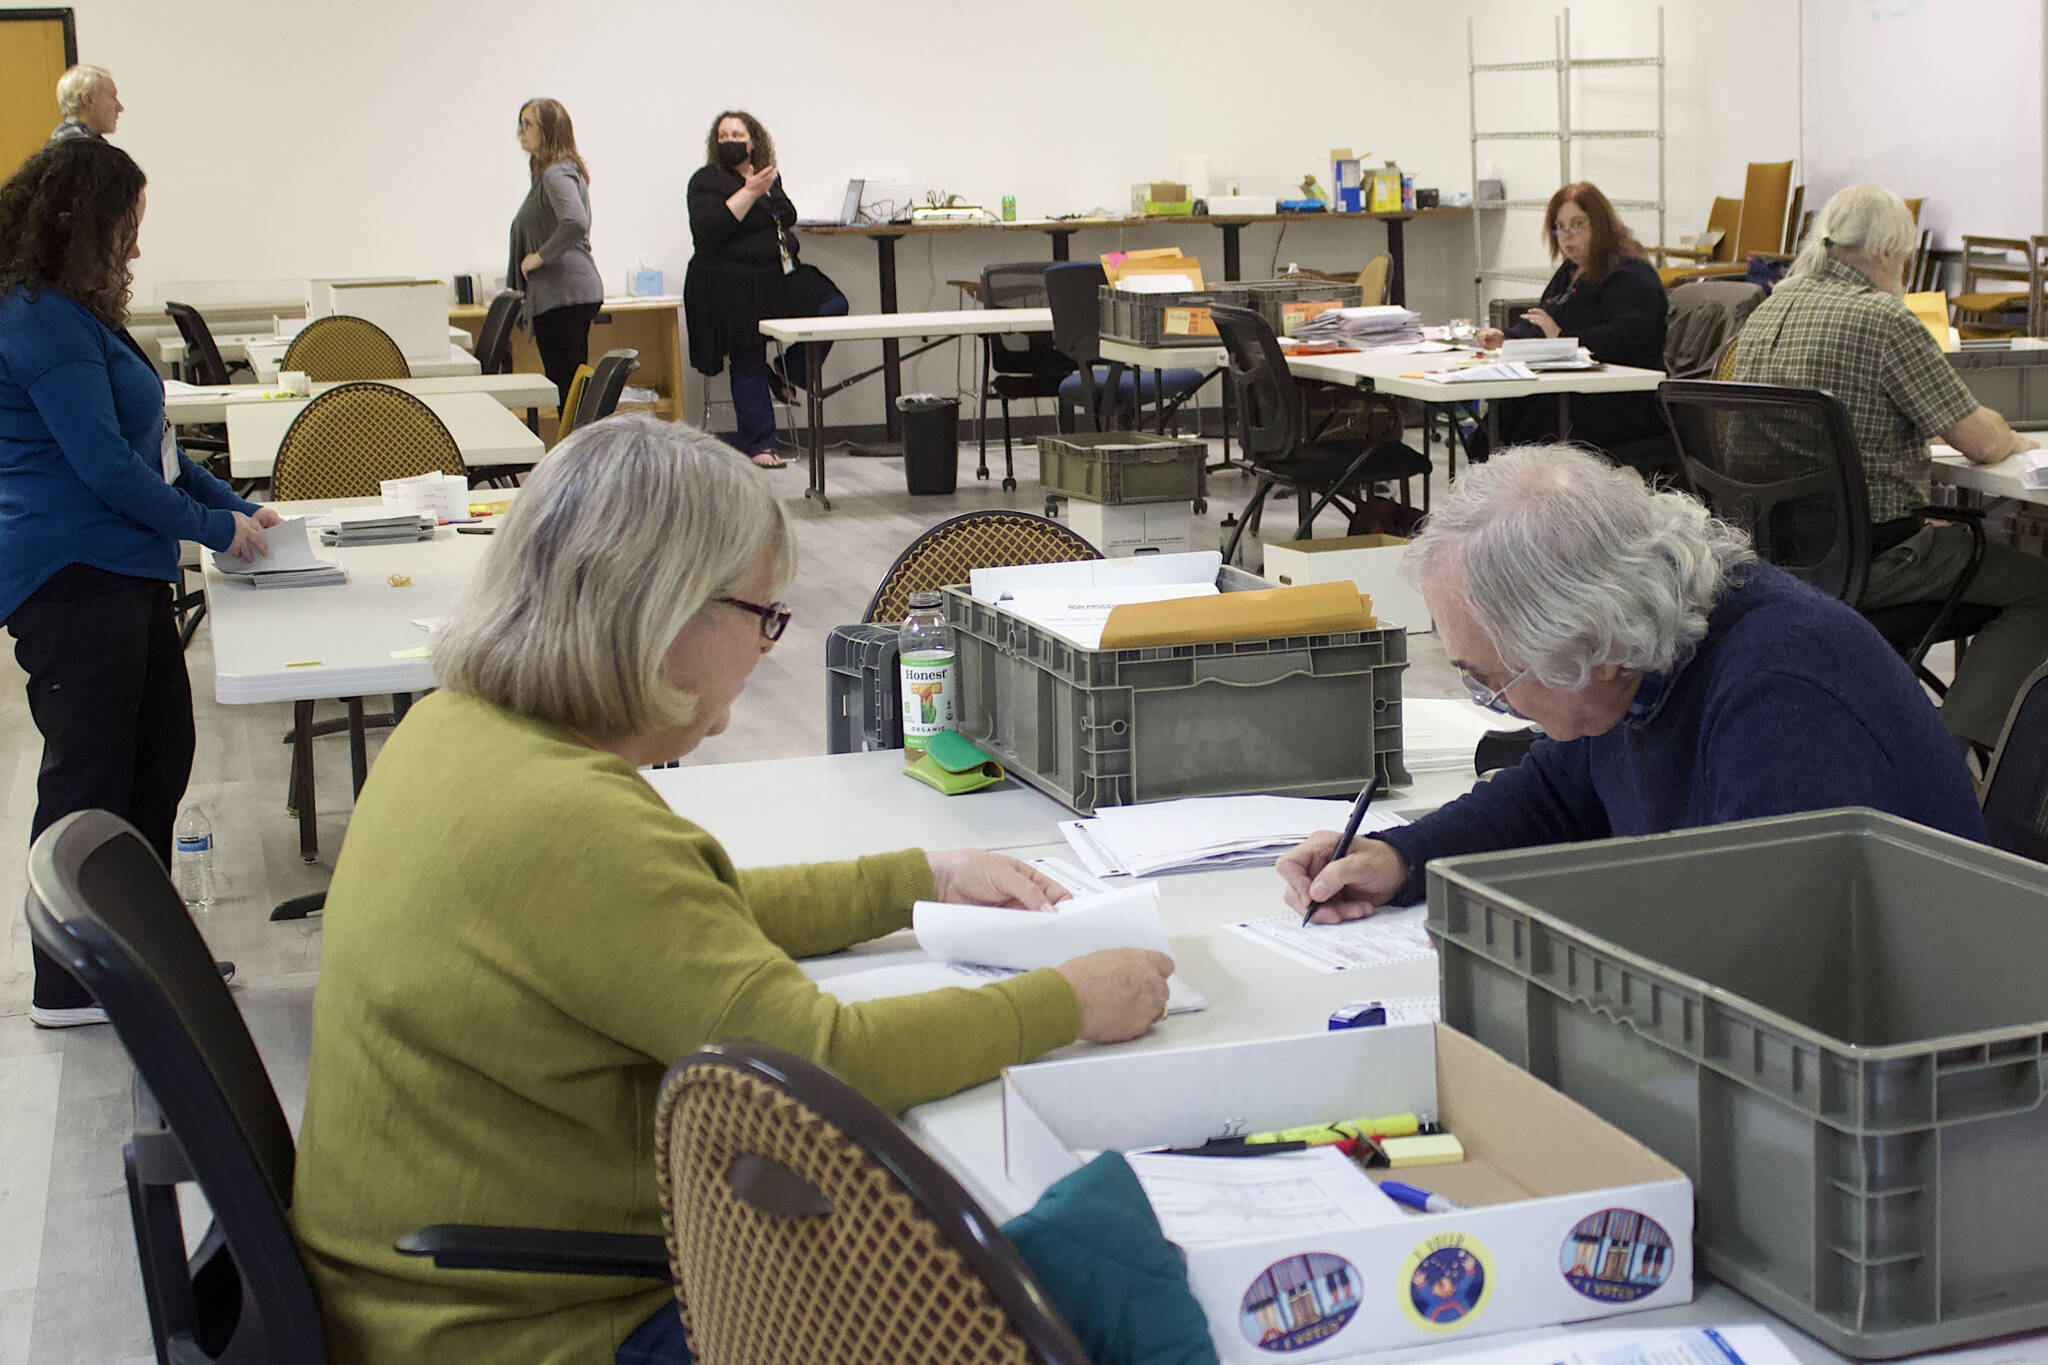 Pat Tynan, left, and Tom Melville, review absentee ballots Tuesday, Nov. 15, 2022, at the Division of Elections office at the Mendenhall Mall in Juneau, Alaska. The review process is taking place in a separate room from where ballots are being tallied for the official results. (Mark Sabbatini / Juneau Empire)